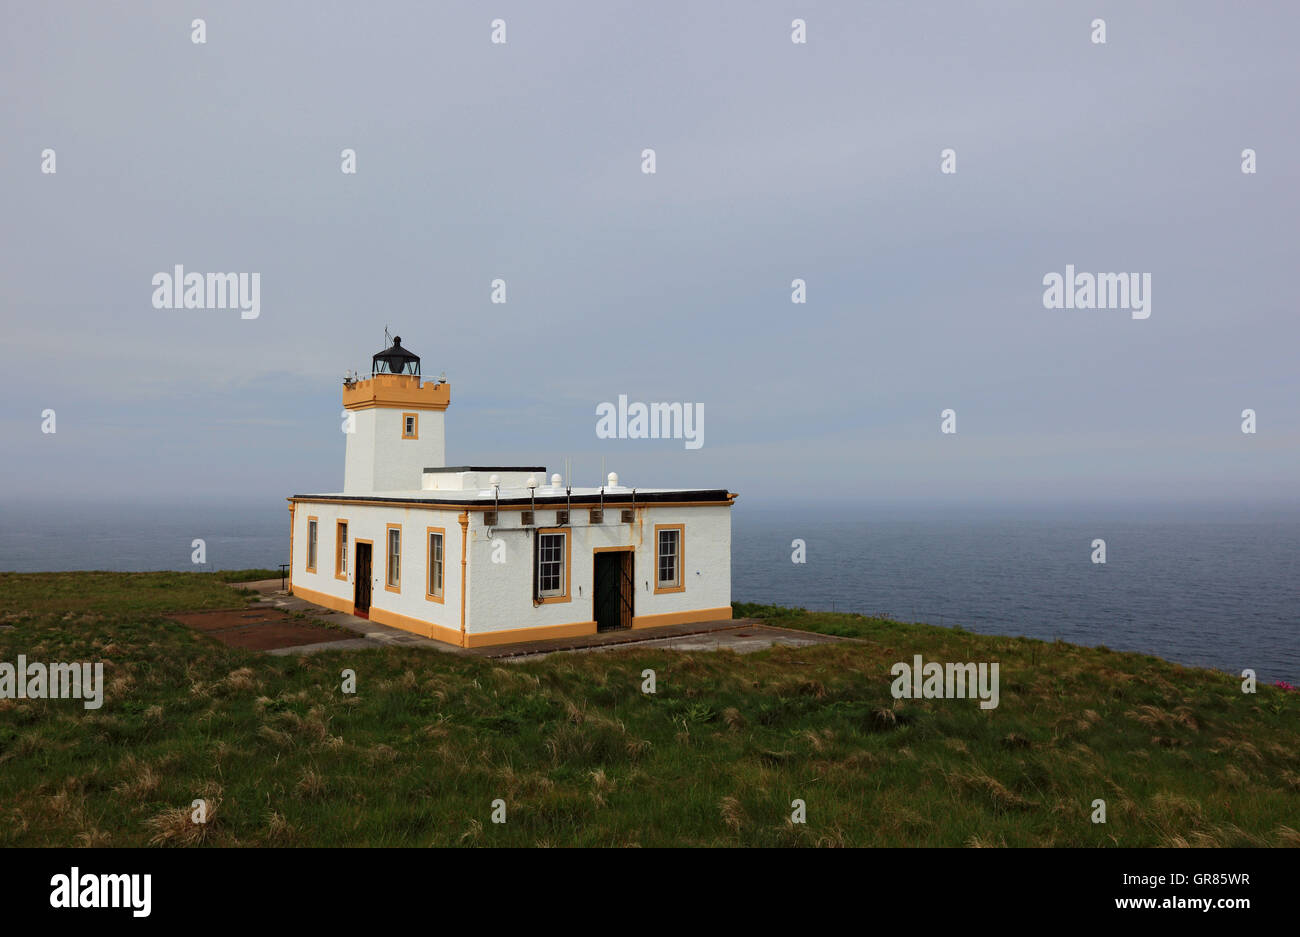 Scotland, highlands, Duncansby Head is the north-east point of Scotland, lighthouse in the cape Stock Photo